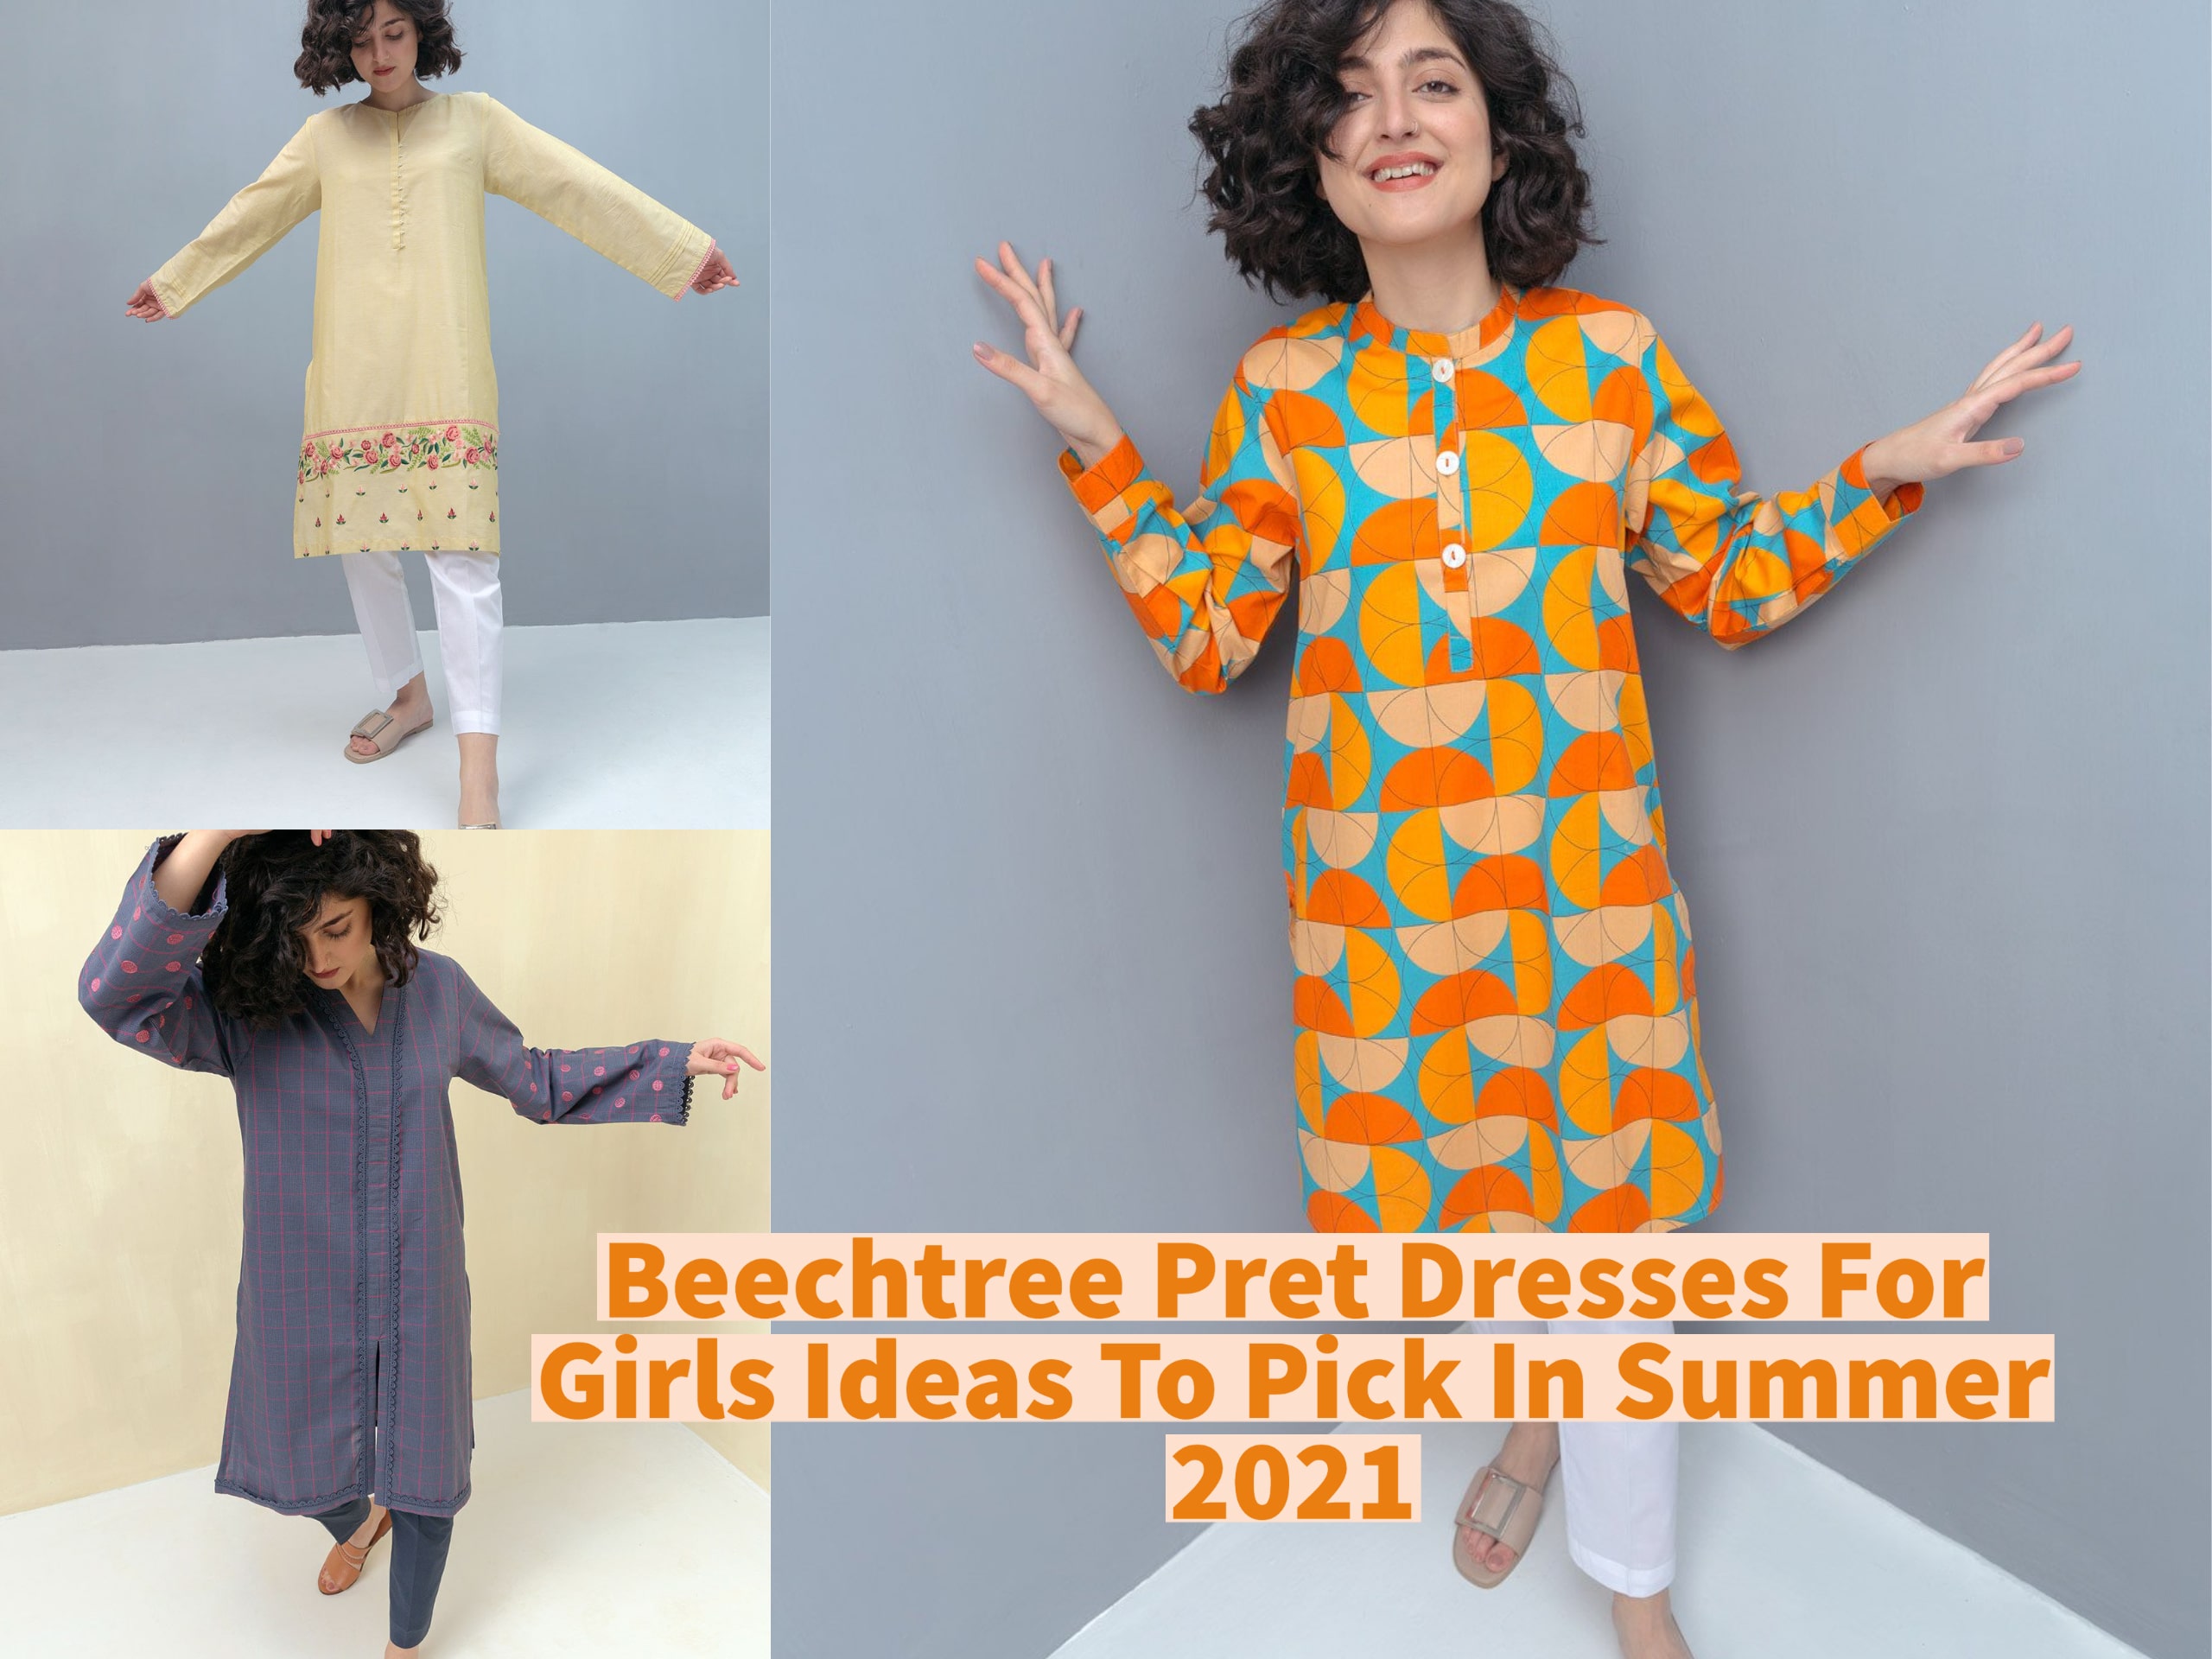 Beechtree Pret Dresses For Girls Ideas To Pick In Summer 2021